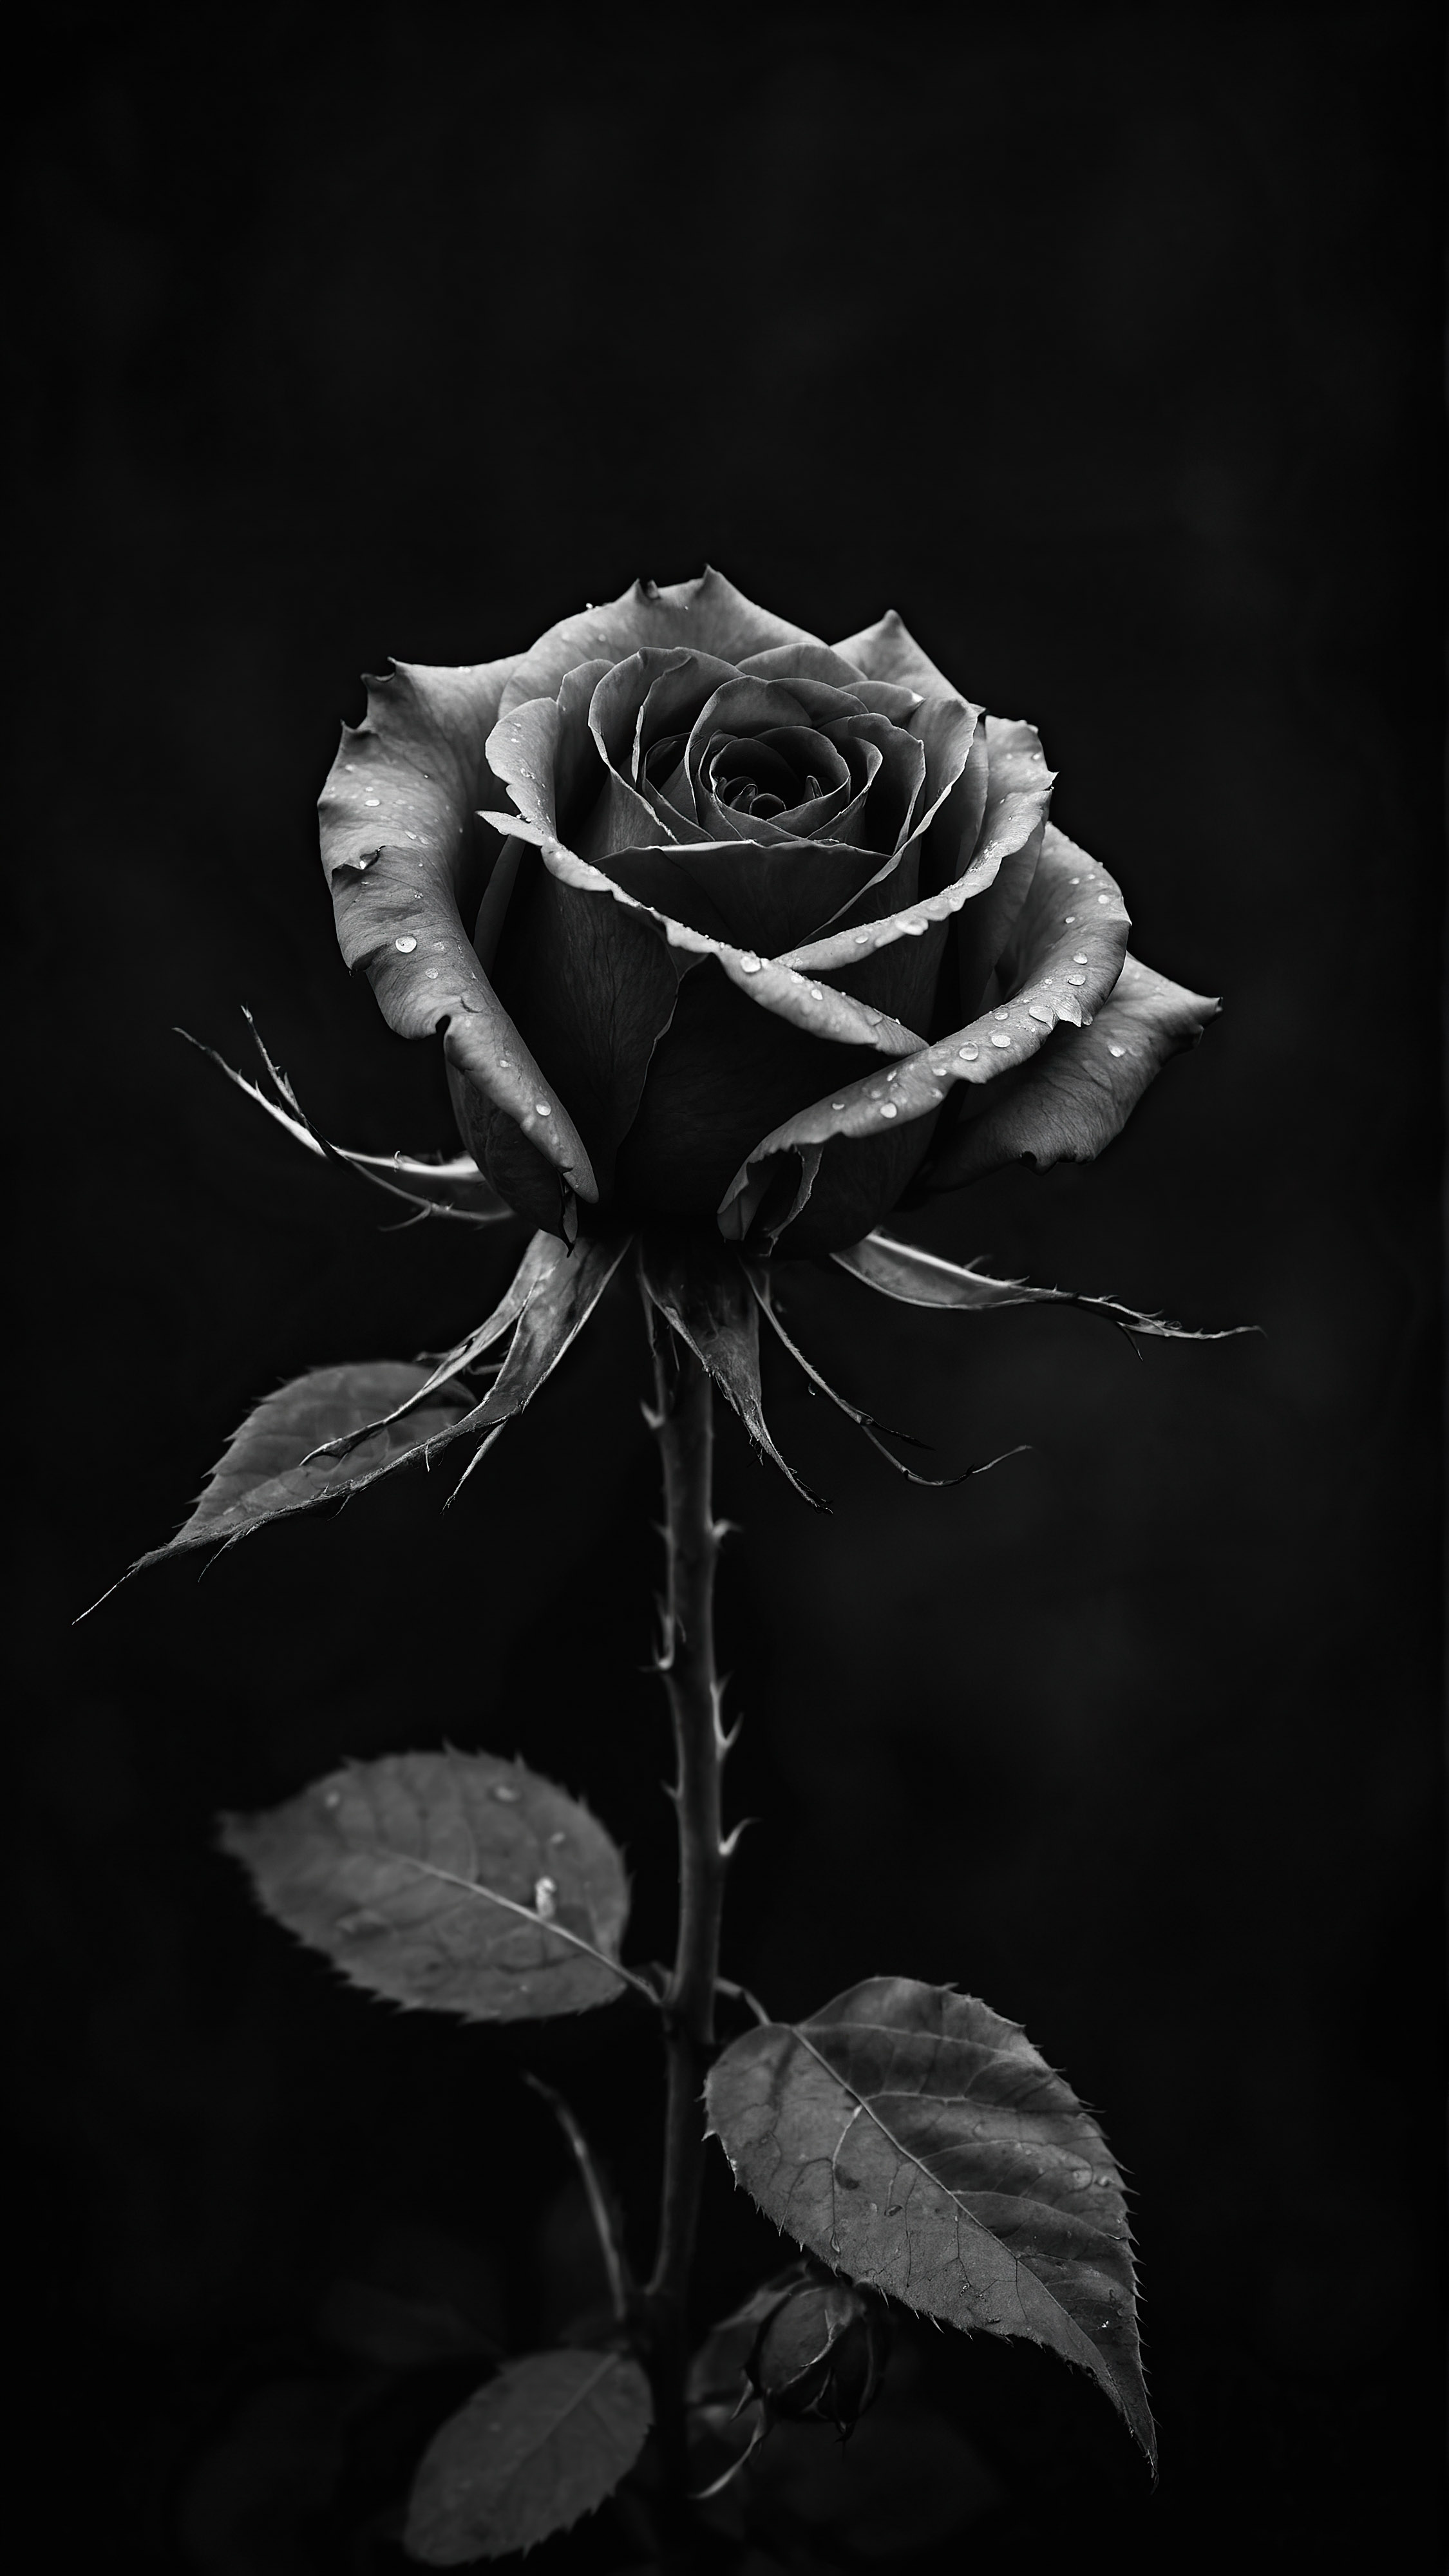 Admire the beauty of black flower wallpaper for iPhone, capturing a delicate rose with its thorny stem and a wilted leaf against a dark background.